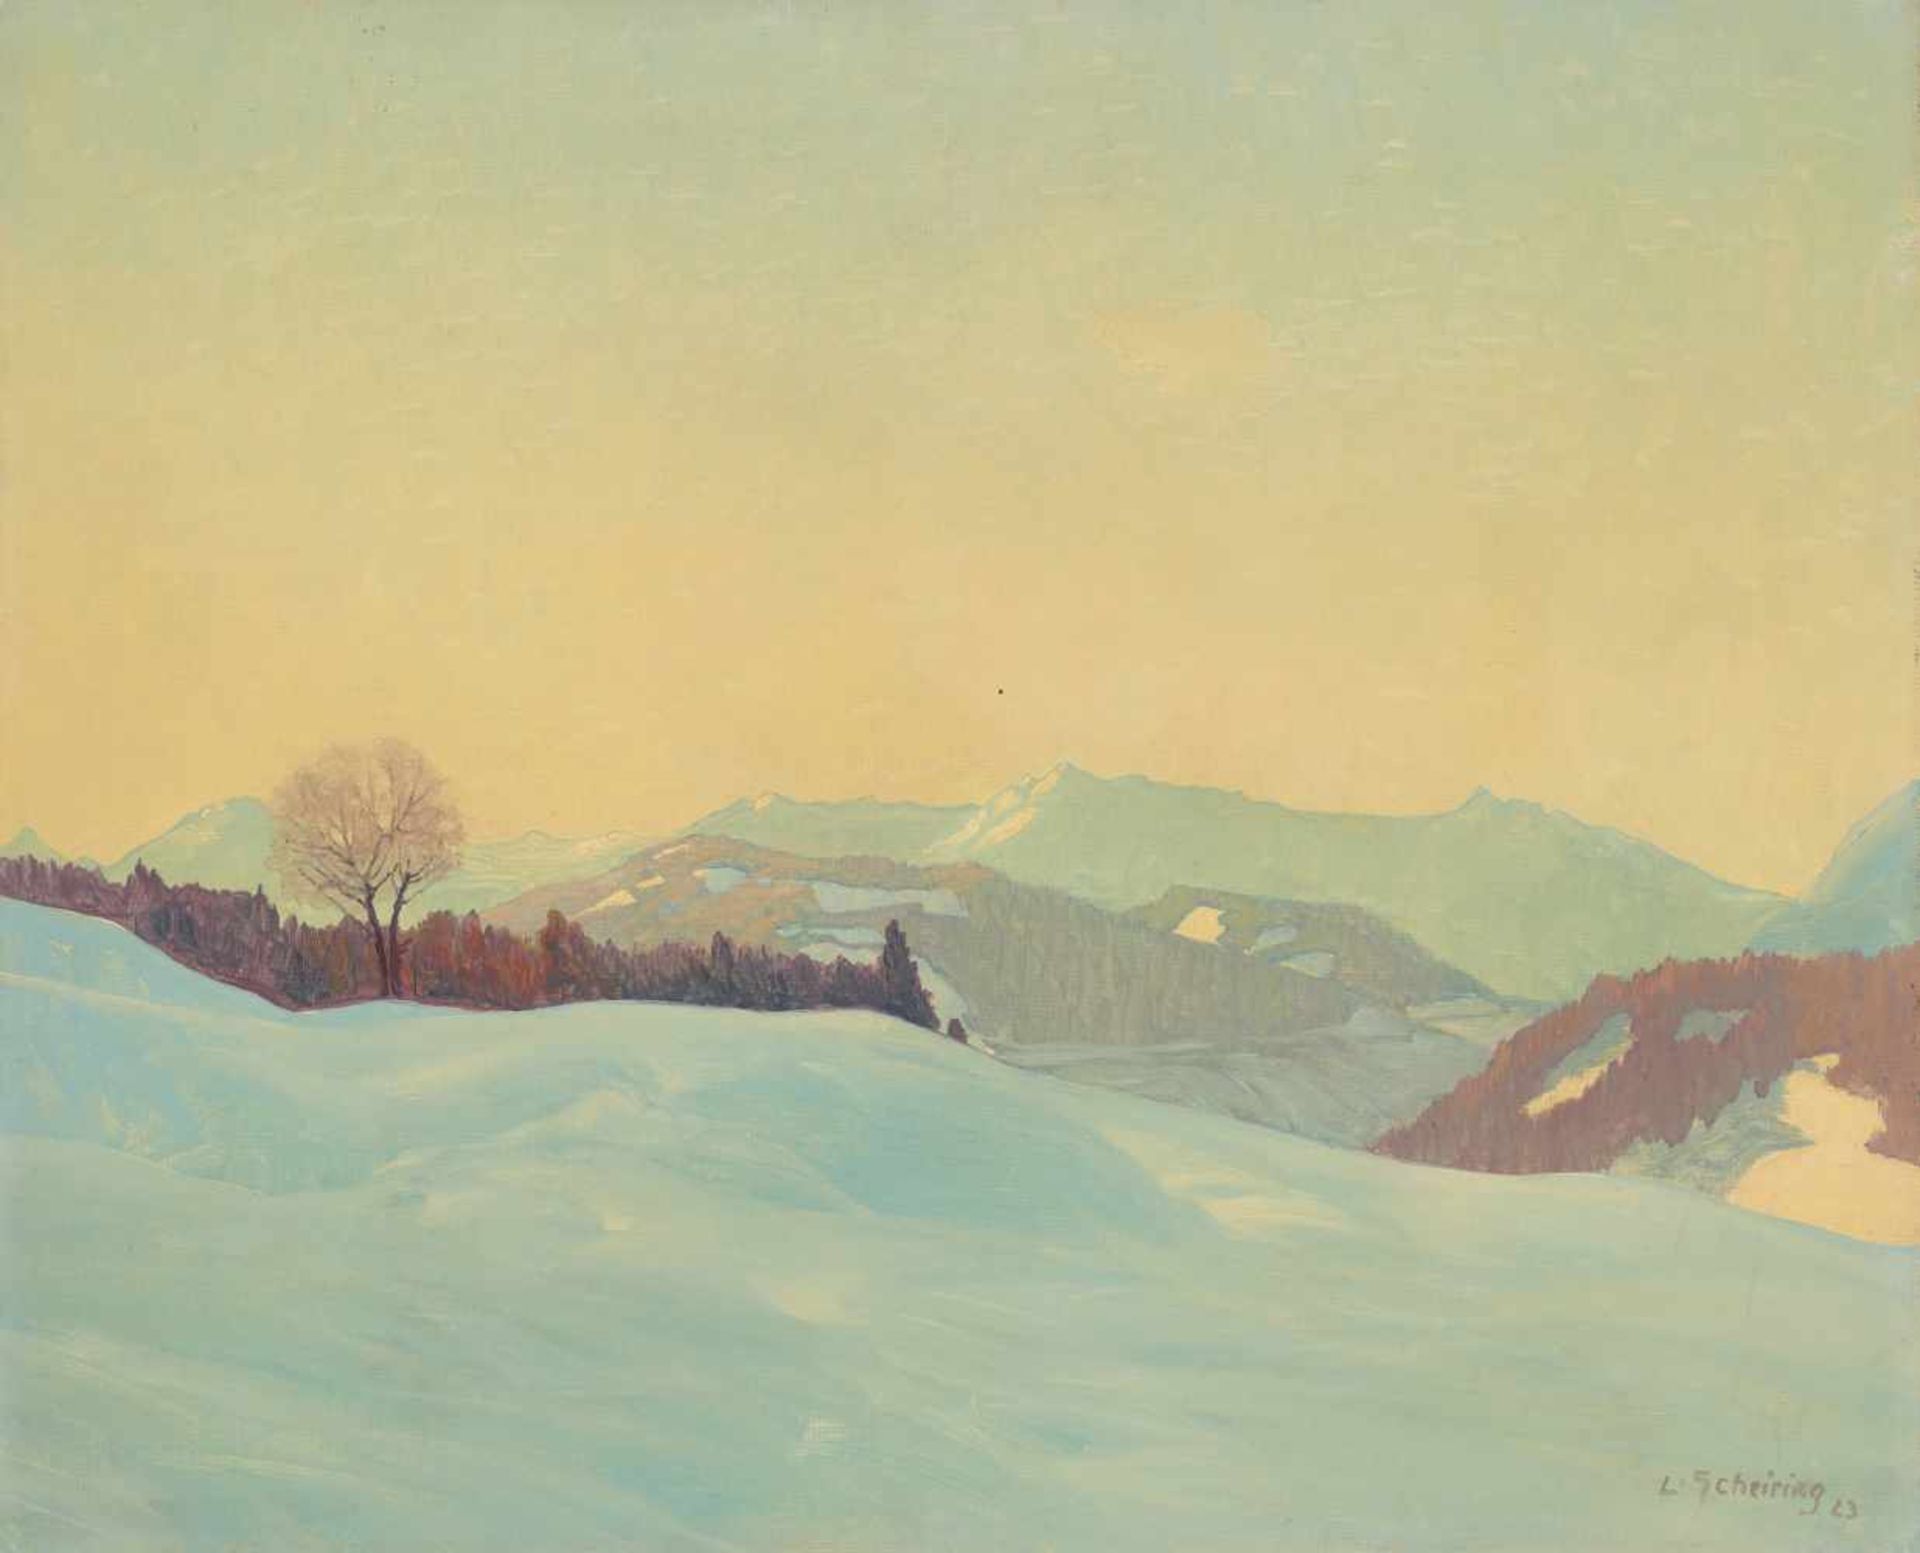 LEOPOLD SCHEIRING (1884-1927), OIL PAINTING ‘SNOWY MOUNTAINS’ 1923Leopold Scheiring (1884-1927)Oil